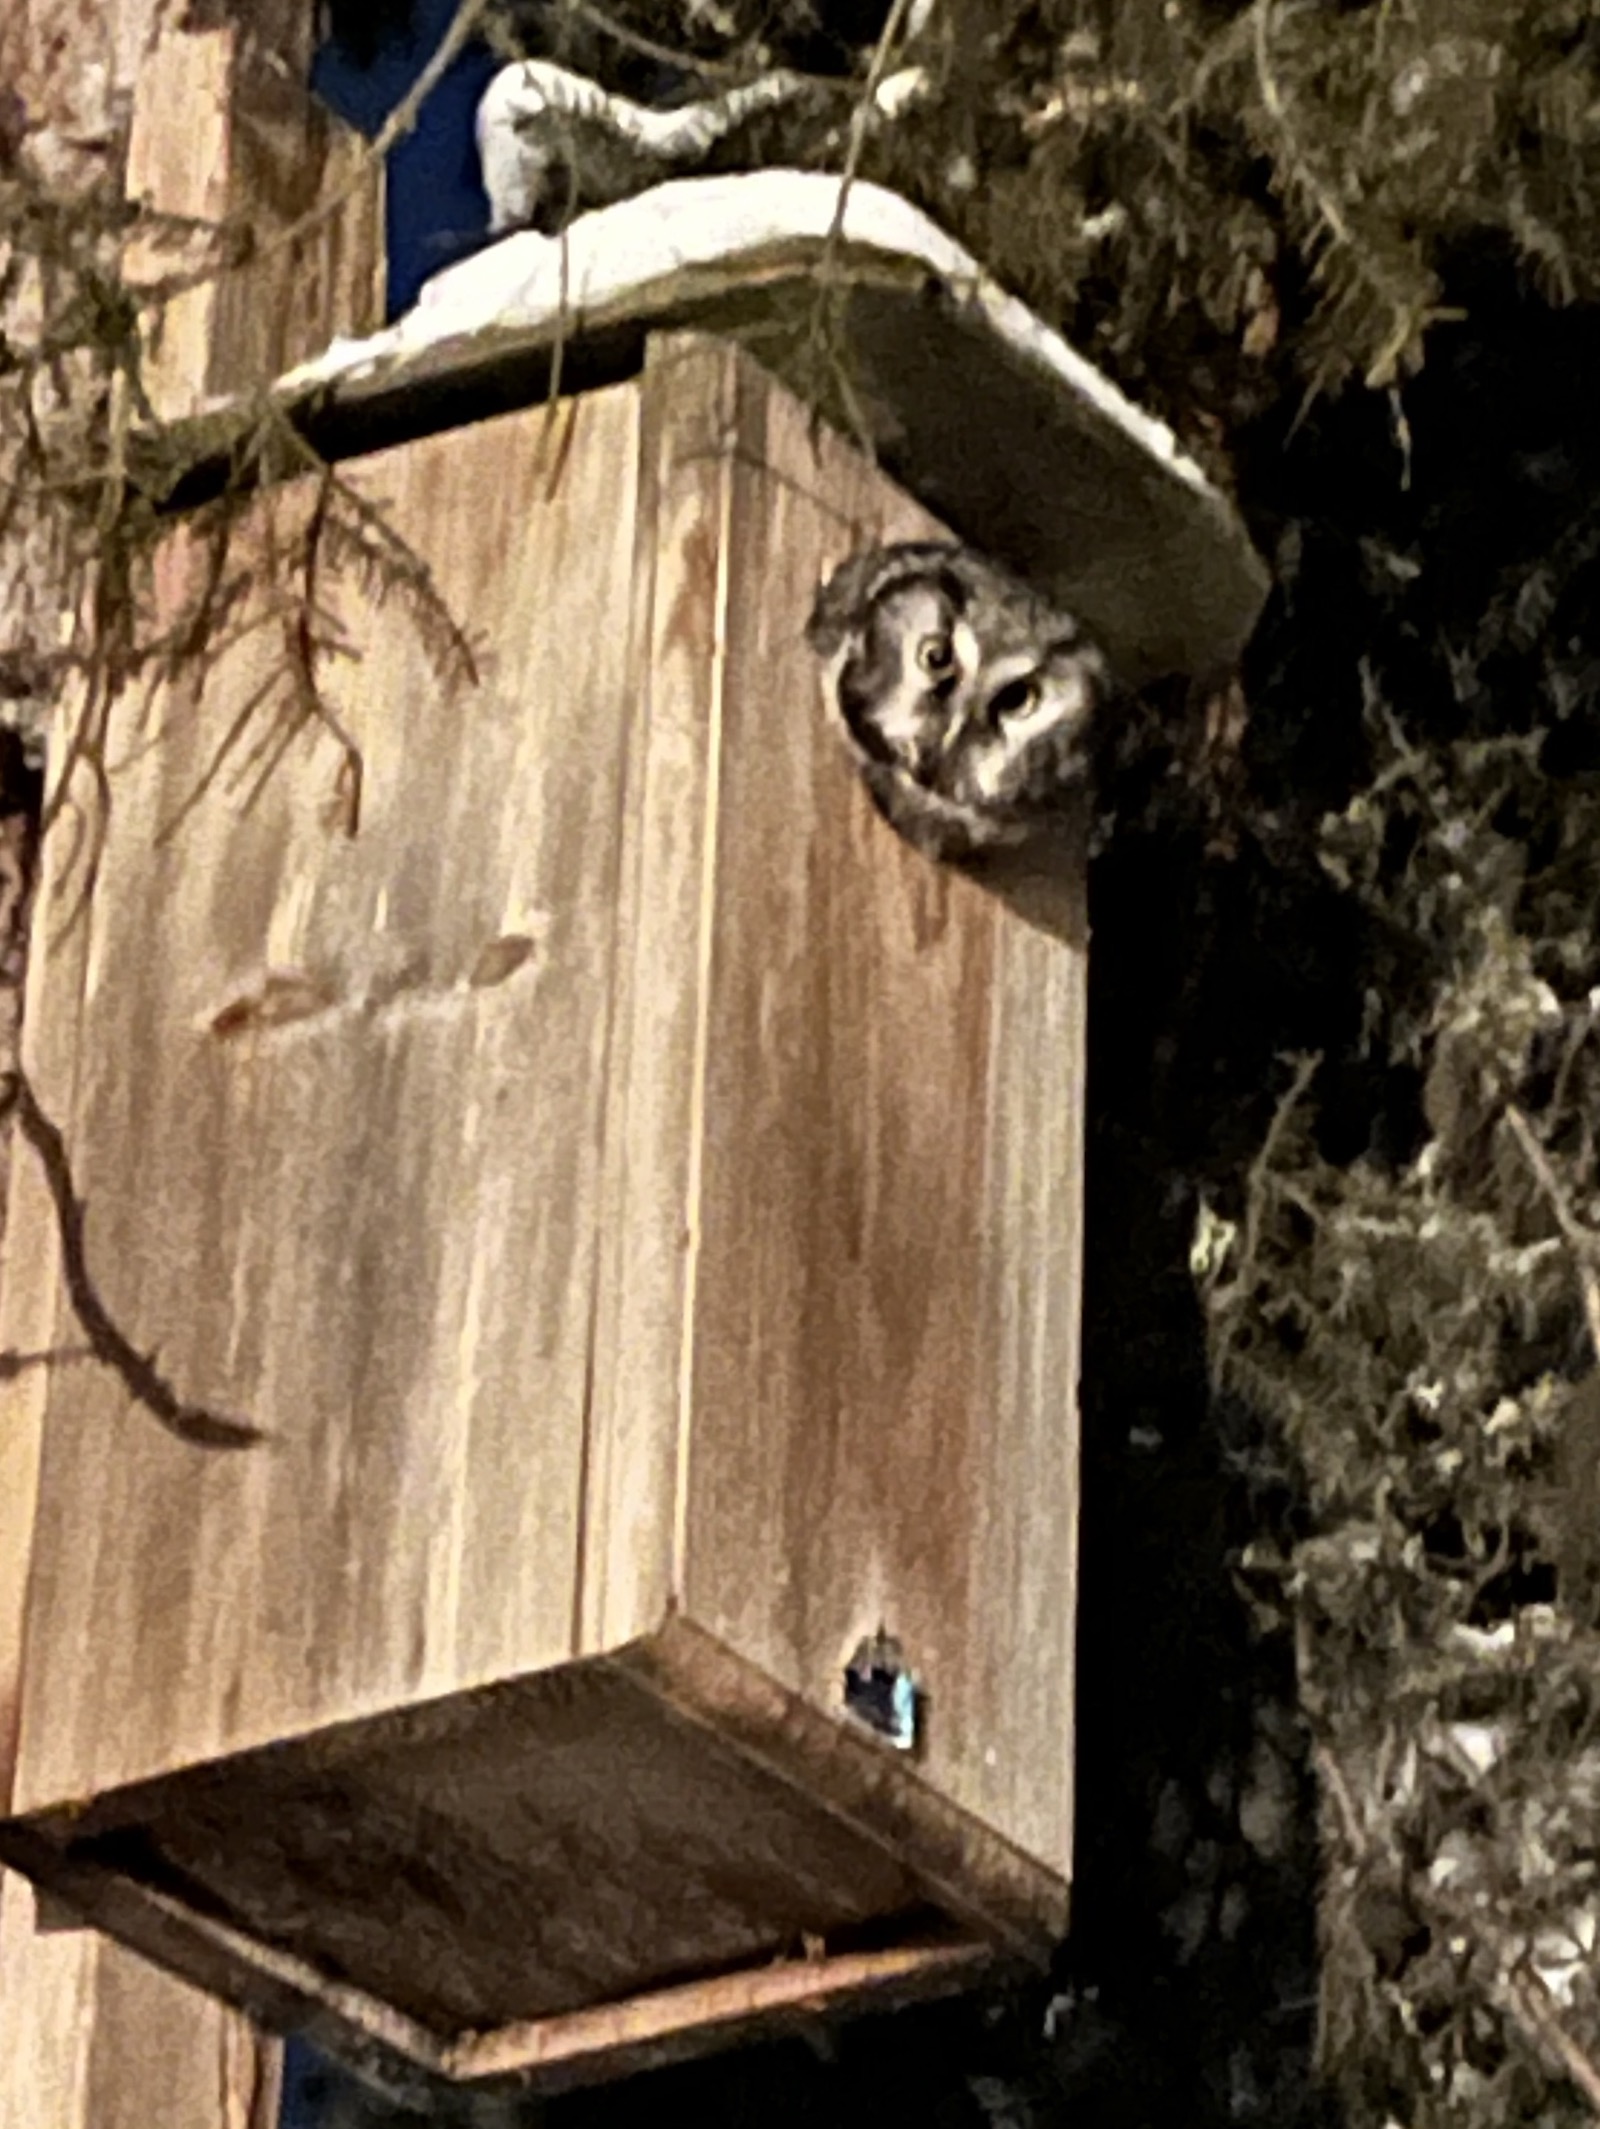 An owl peers out of a wooden nest box attached to a spruce tree. Snow sits on the roof of the box.